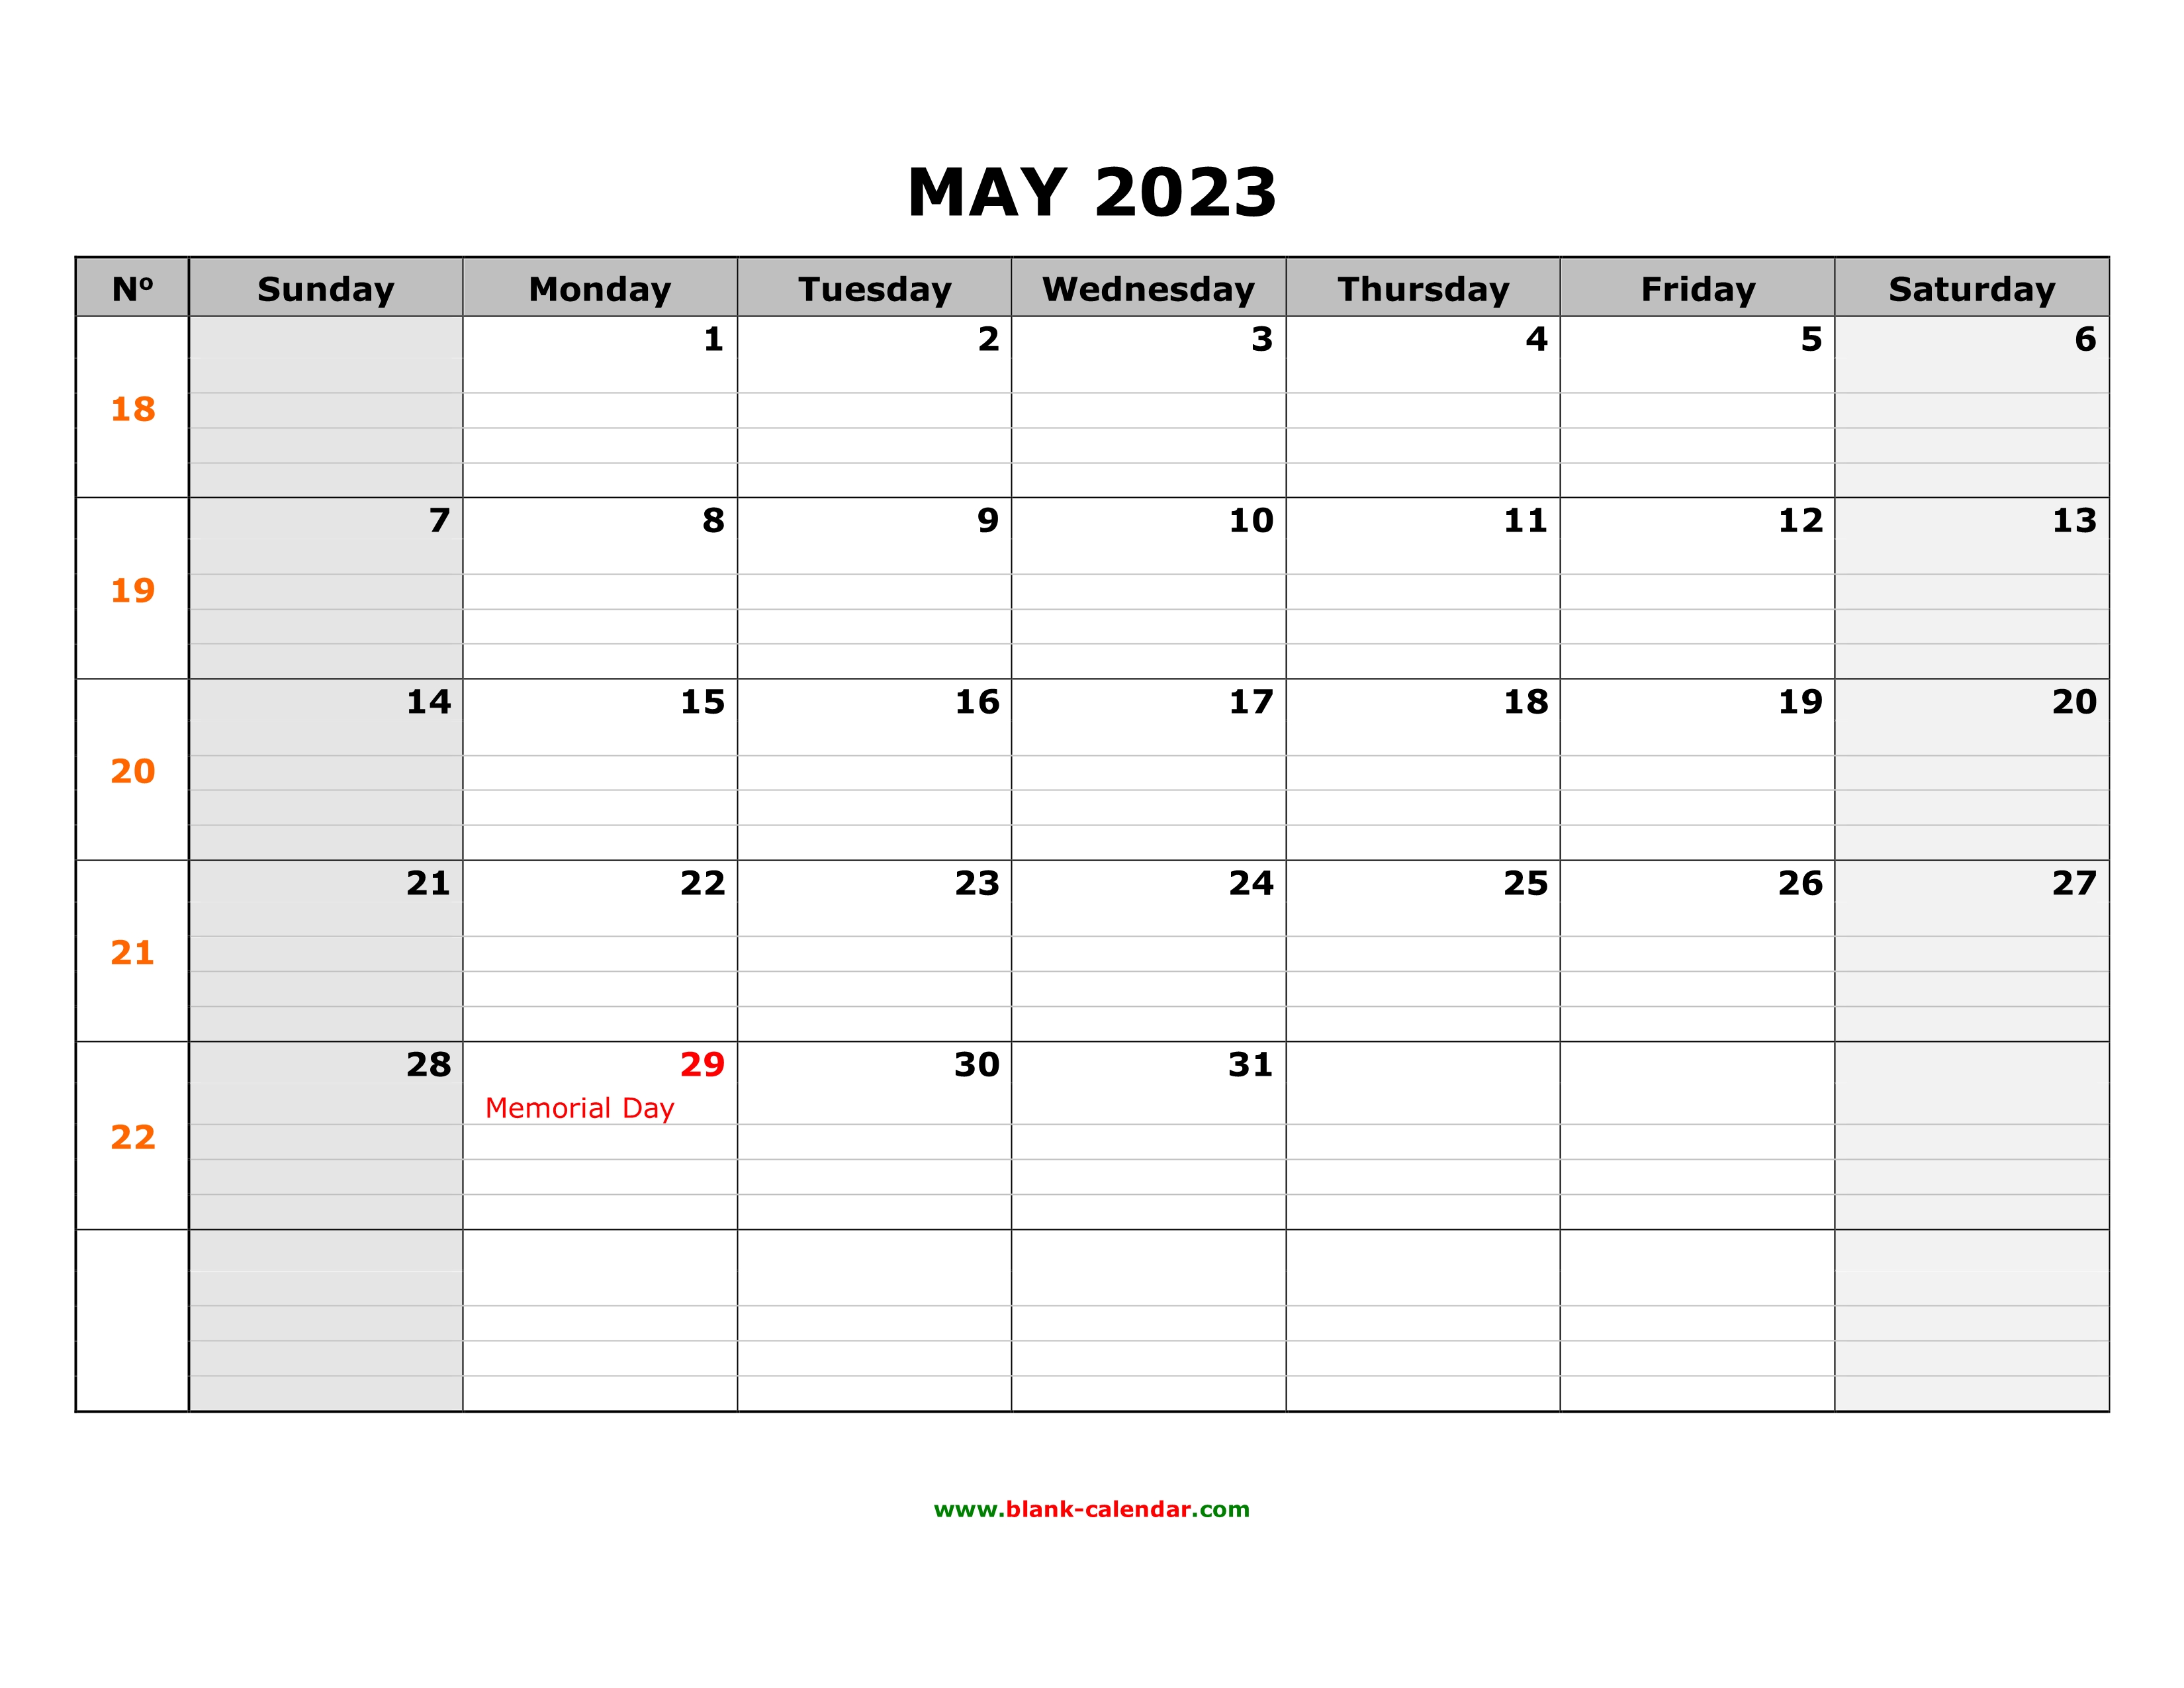 Free Download Printable May 2023 Calendar Large Box Grid Space For Notes